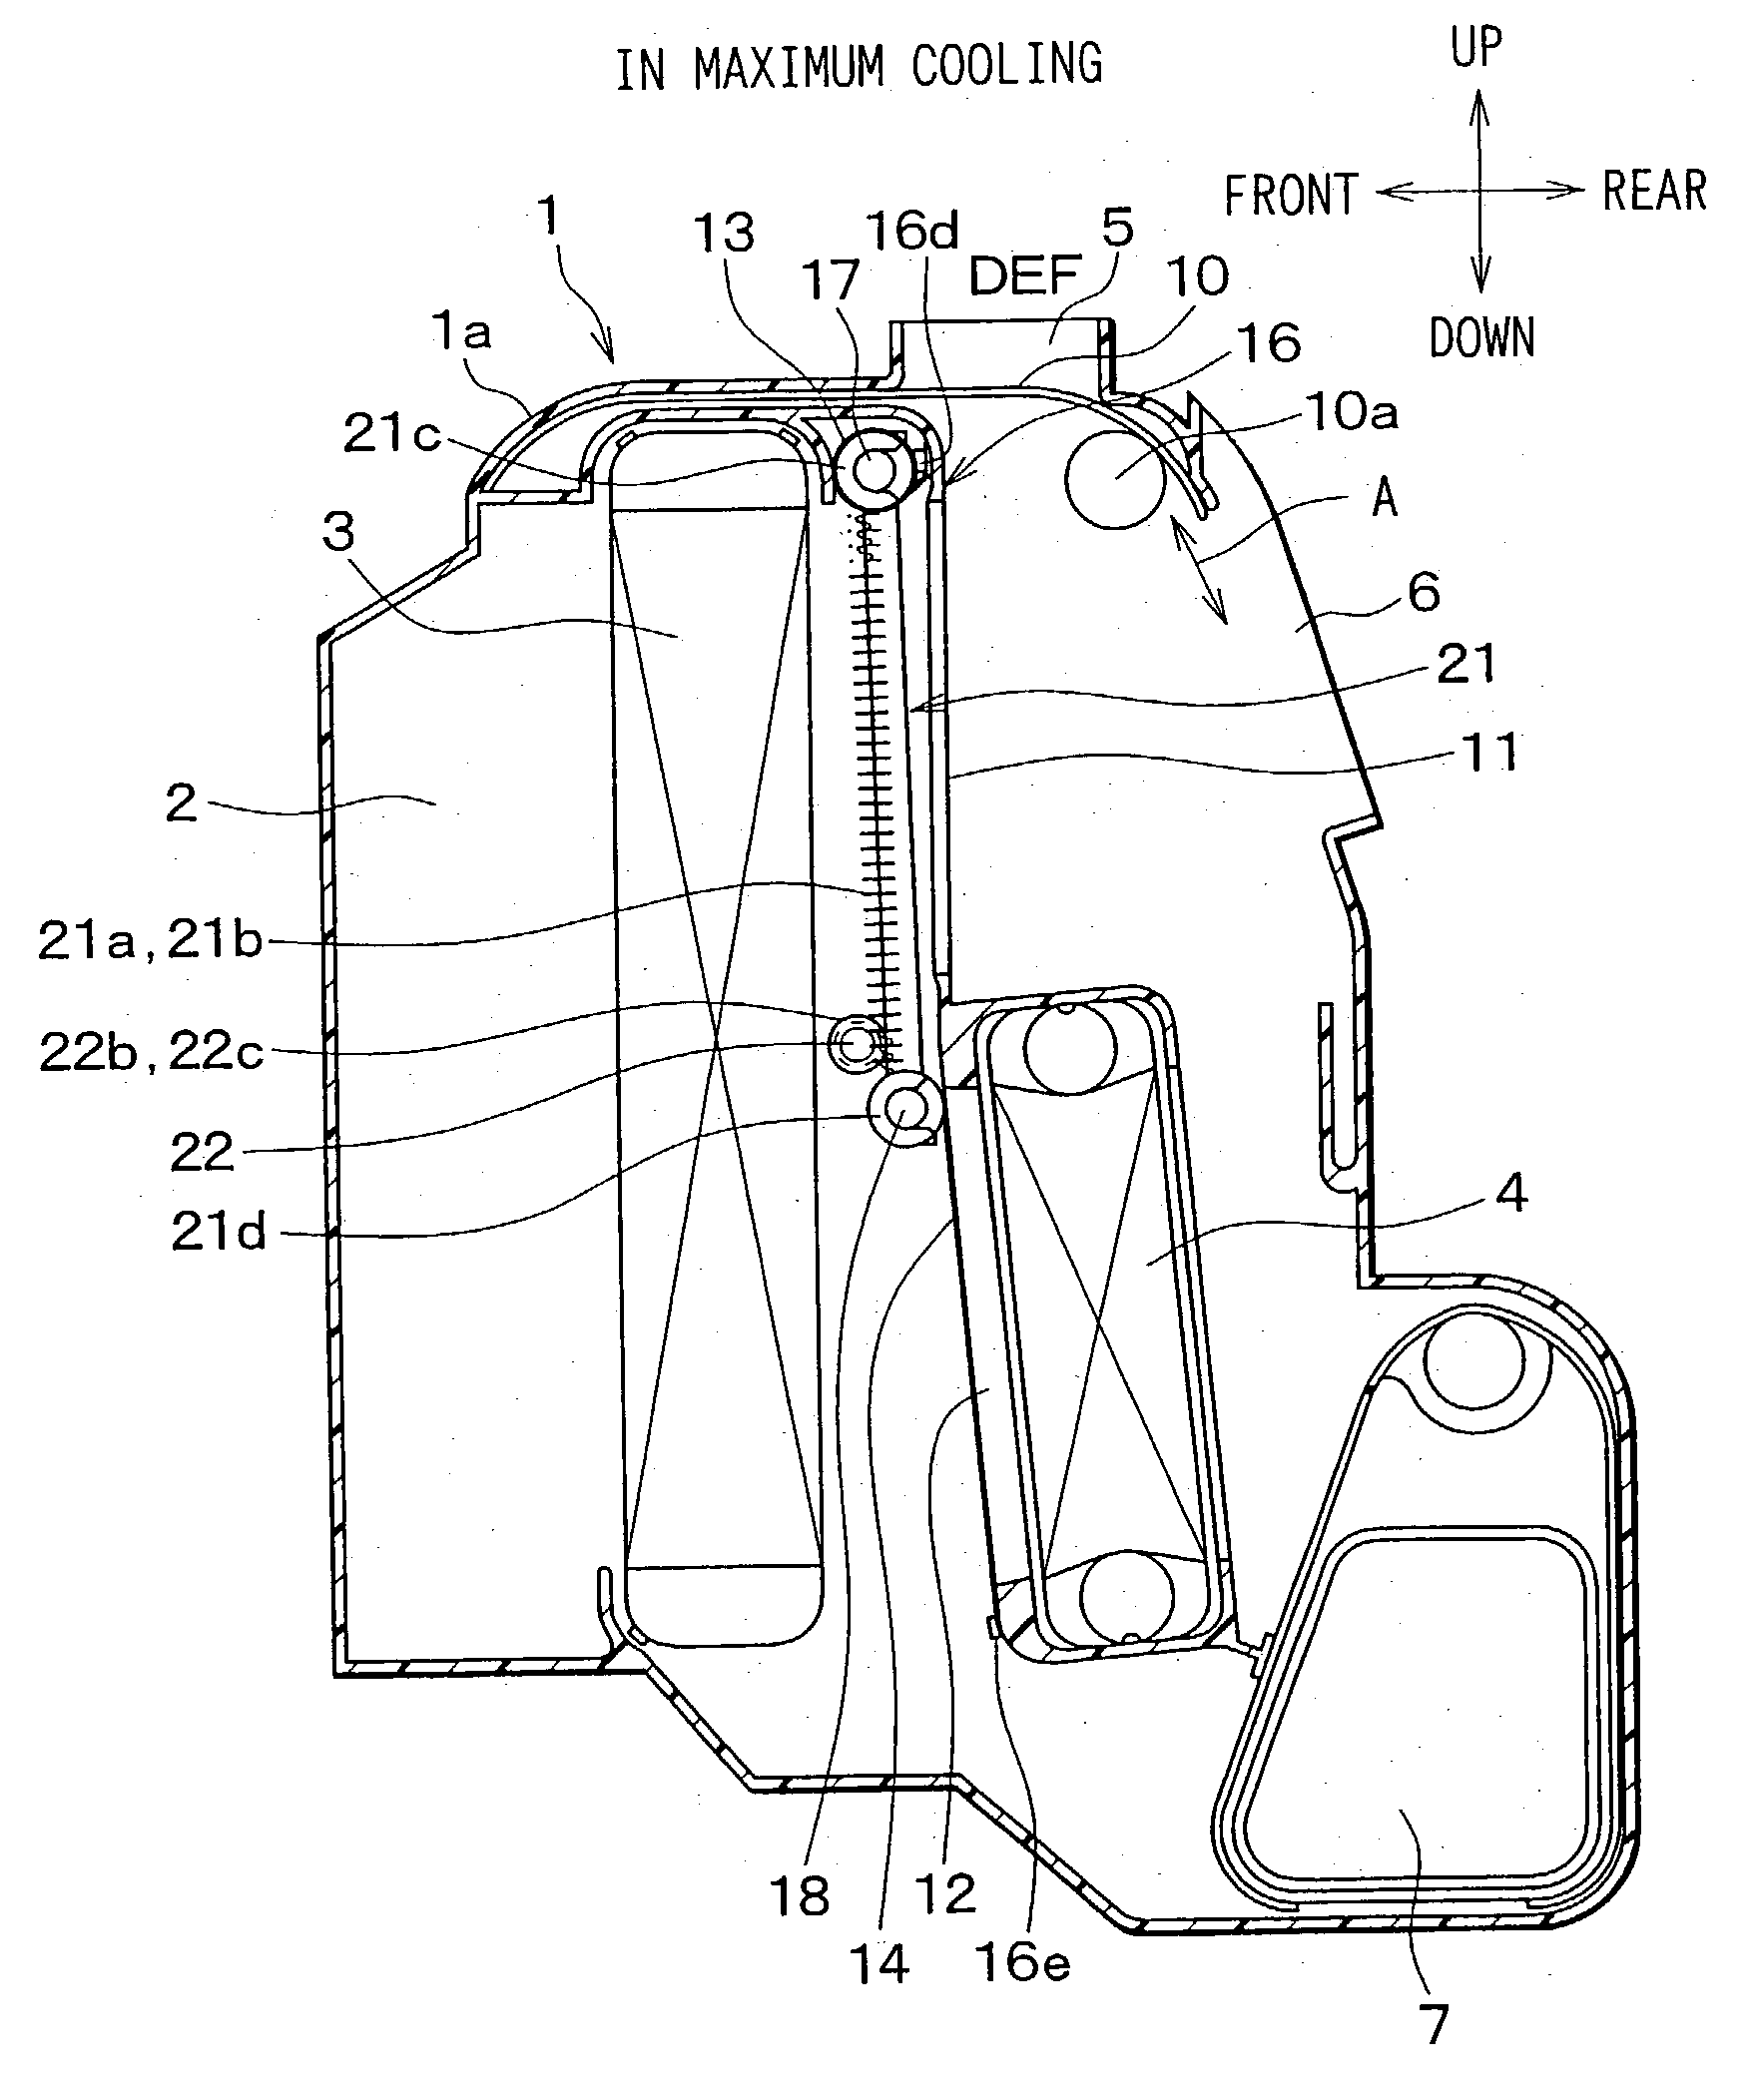 Air-passage opening/closing device